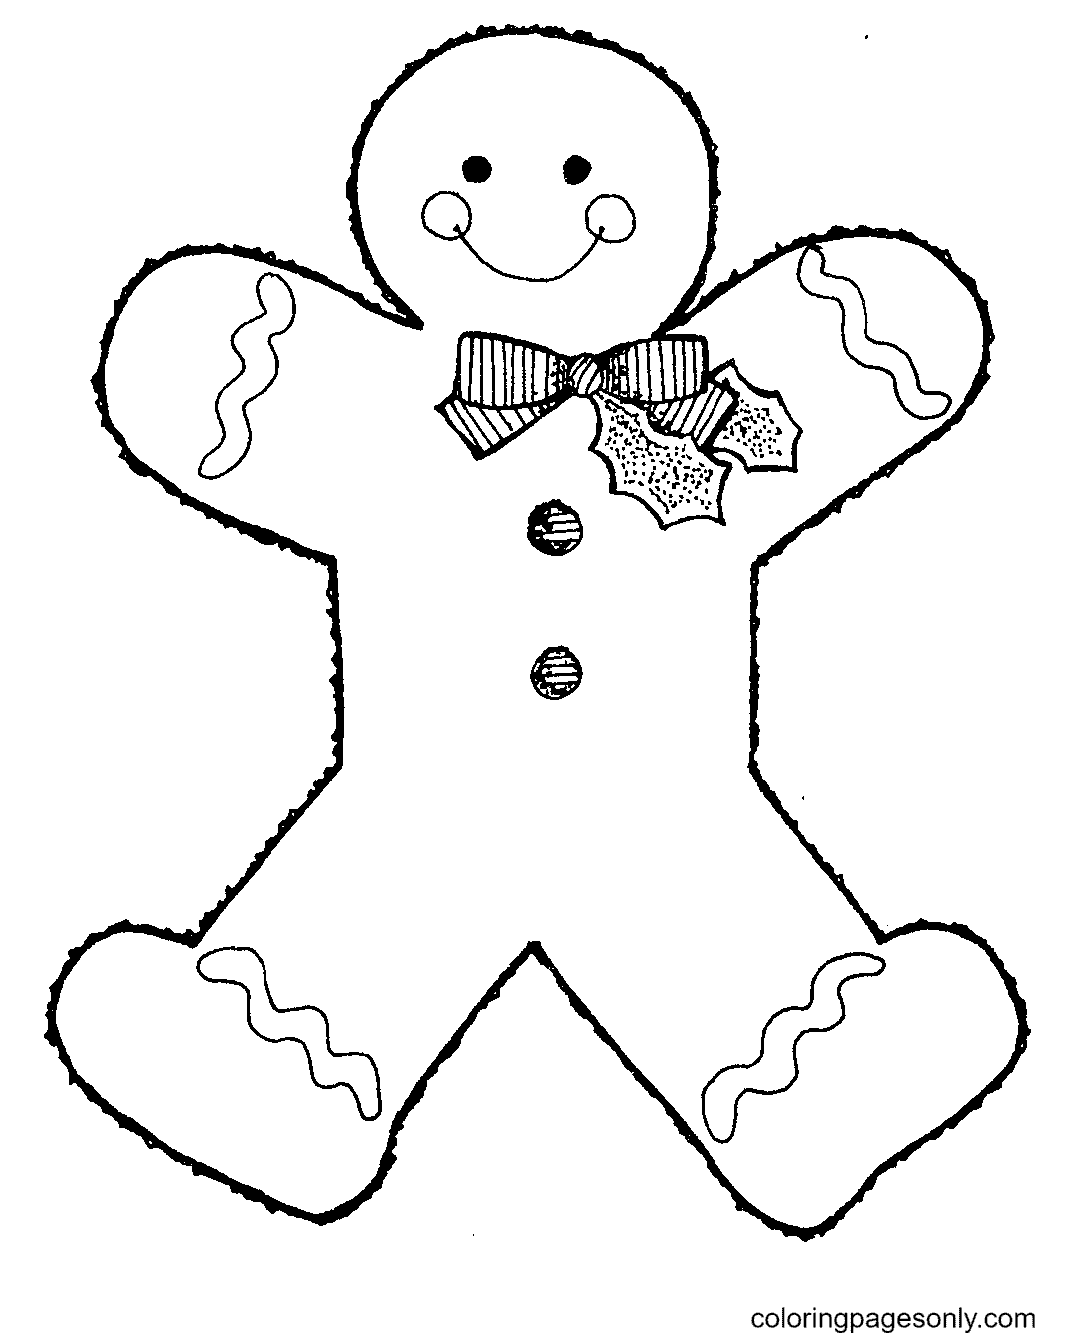 Gingerbread Man Coloring Pages Printable for Free Download